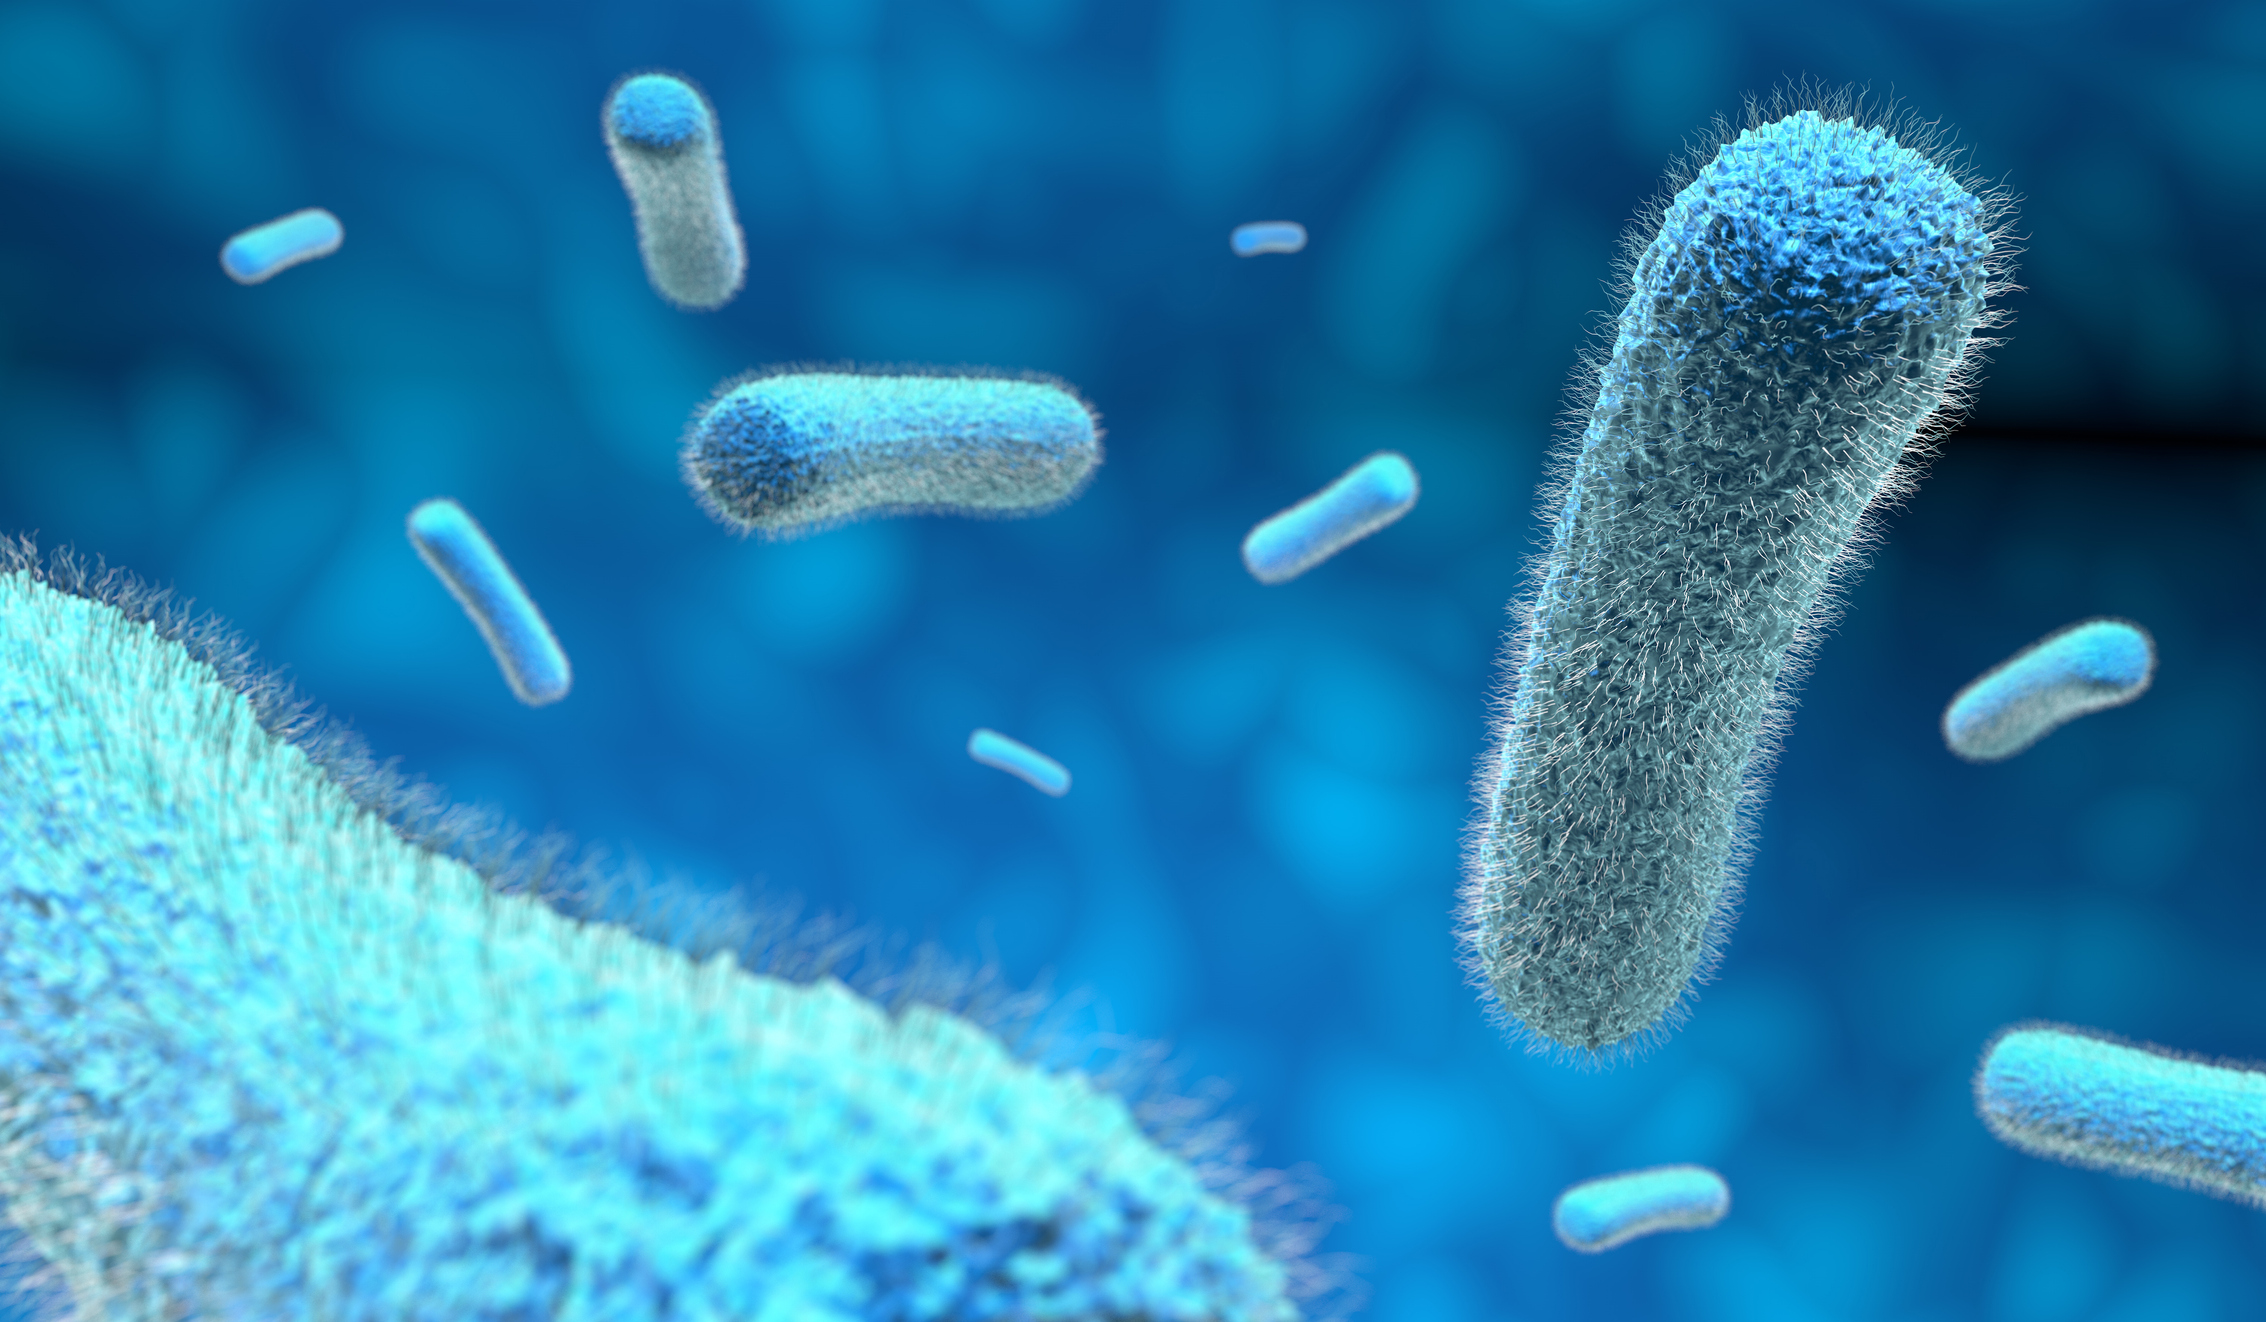 3D illustration of rod-shaped bacteria on a blue background.